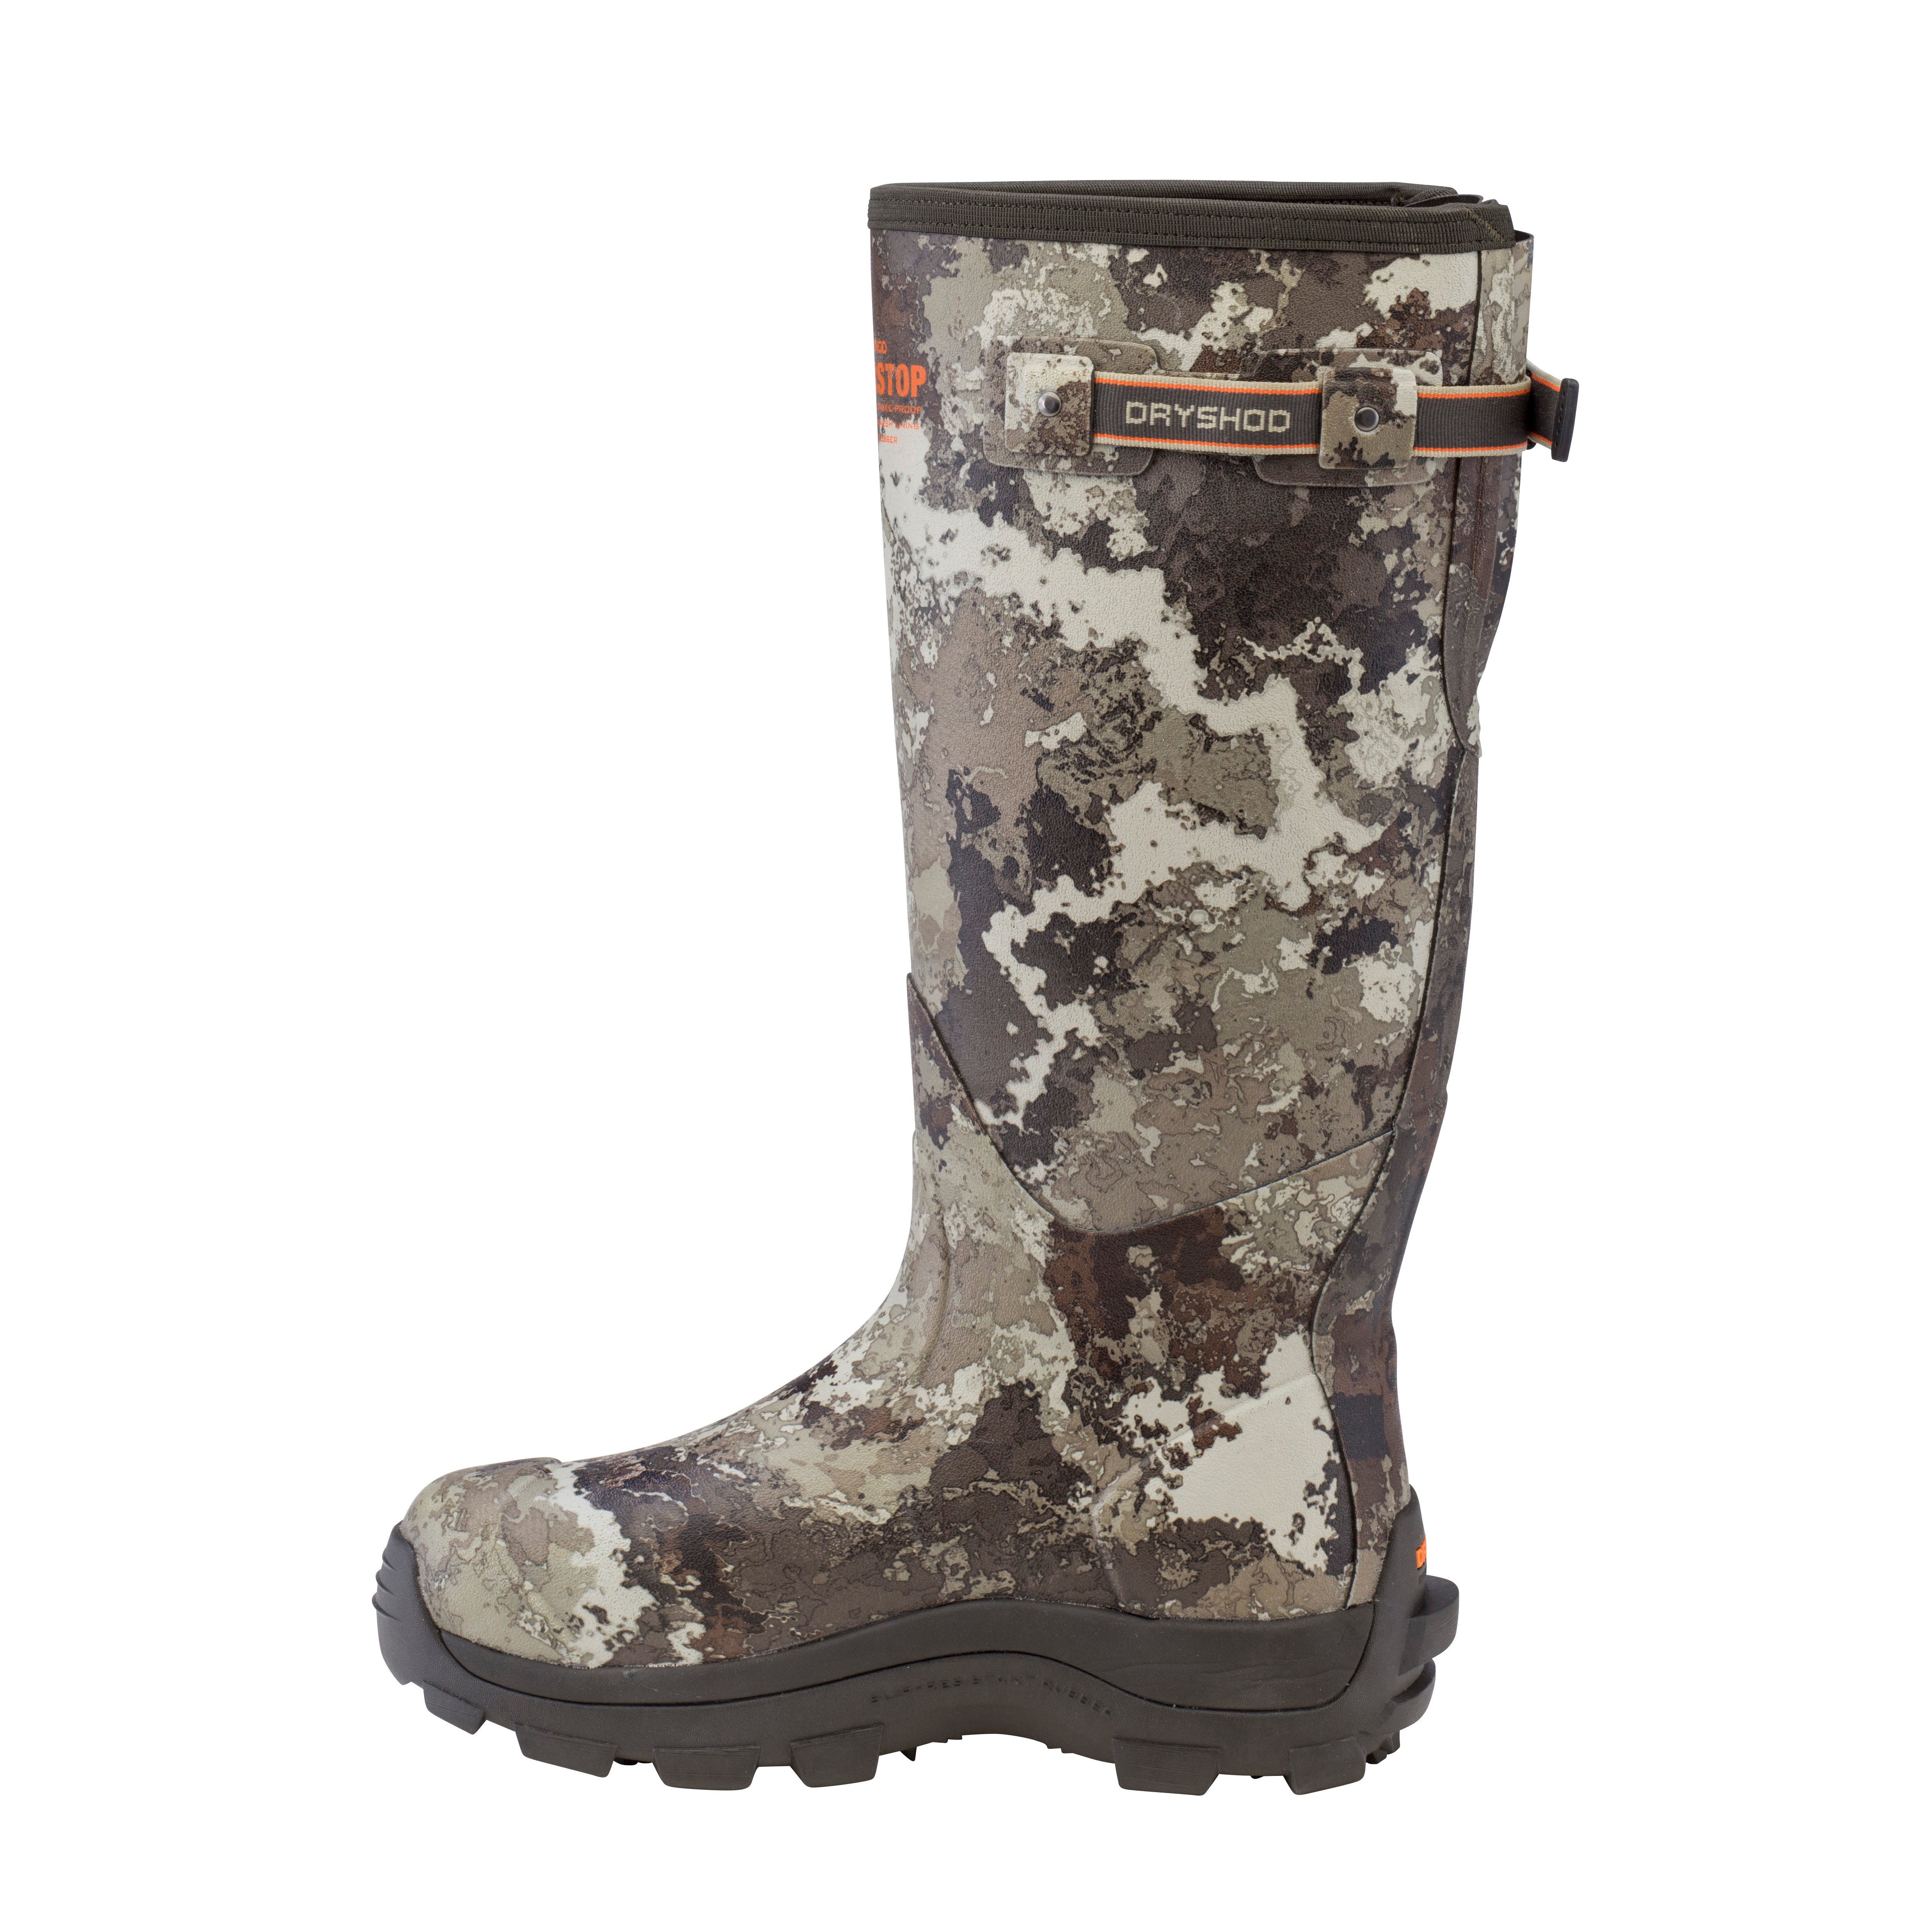 Dryshod ViperStop Snake Hunting Boot VEIL Camo With Gusset Sizes 7-16  VPS-MH-CM 